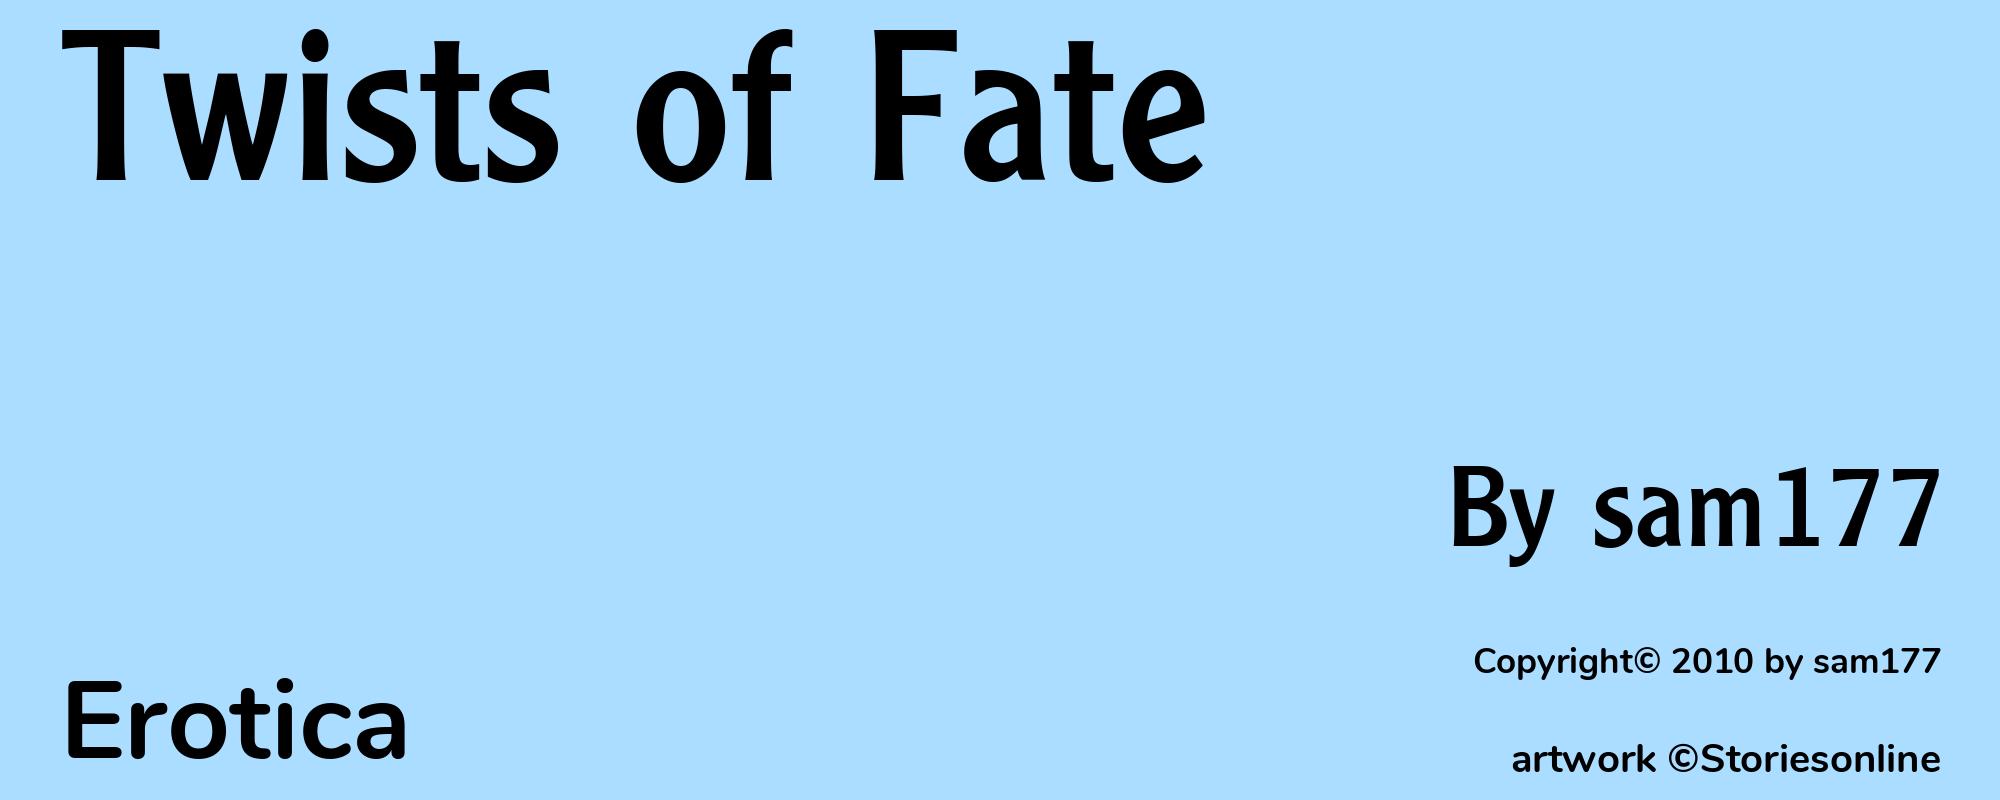 Twists of Fate - Cover